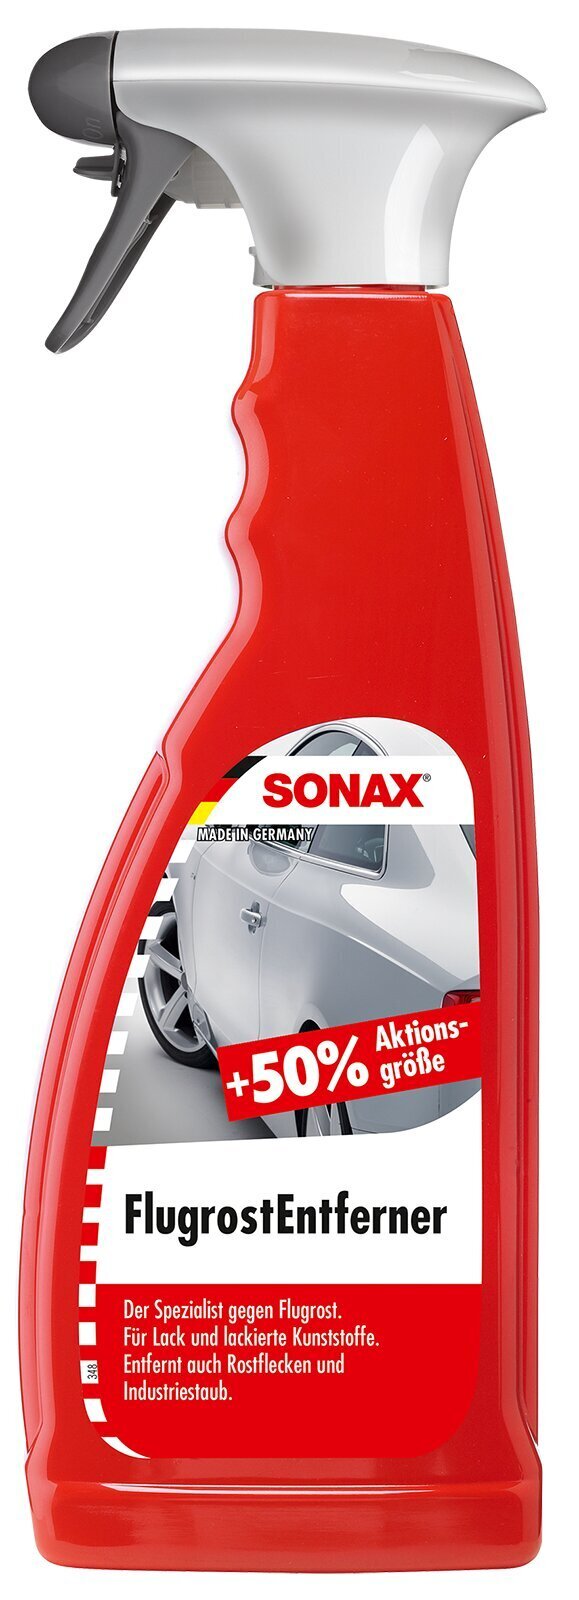 SONAX Fallout Cleaner - 750ml